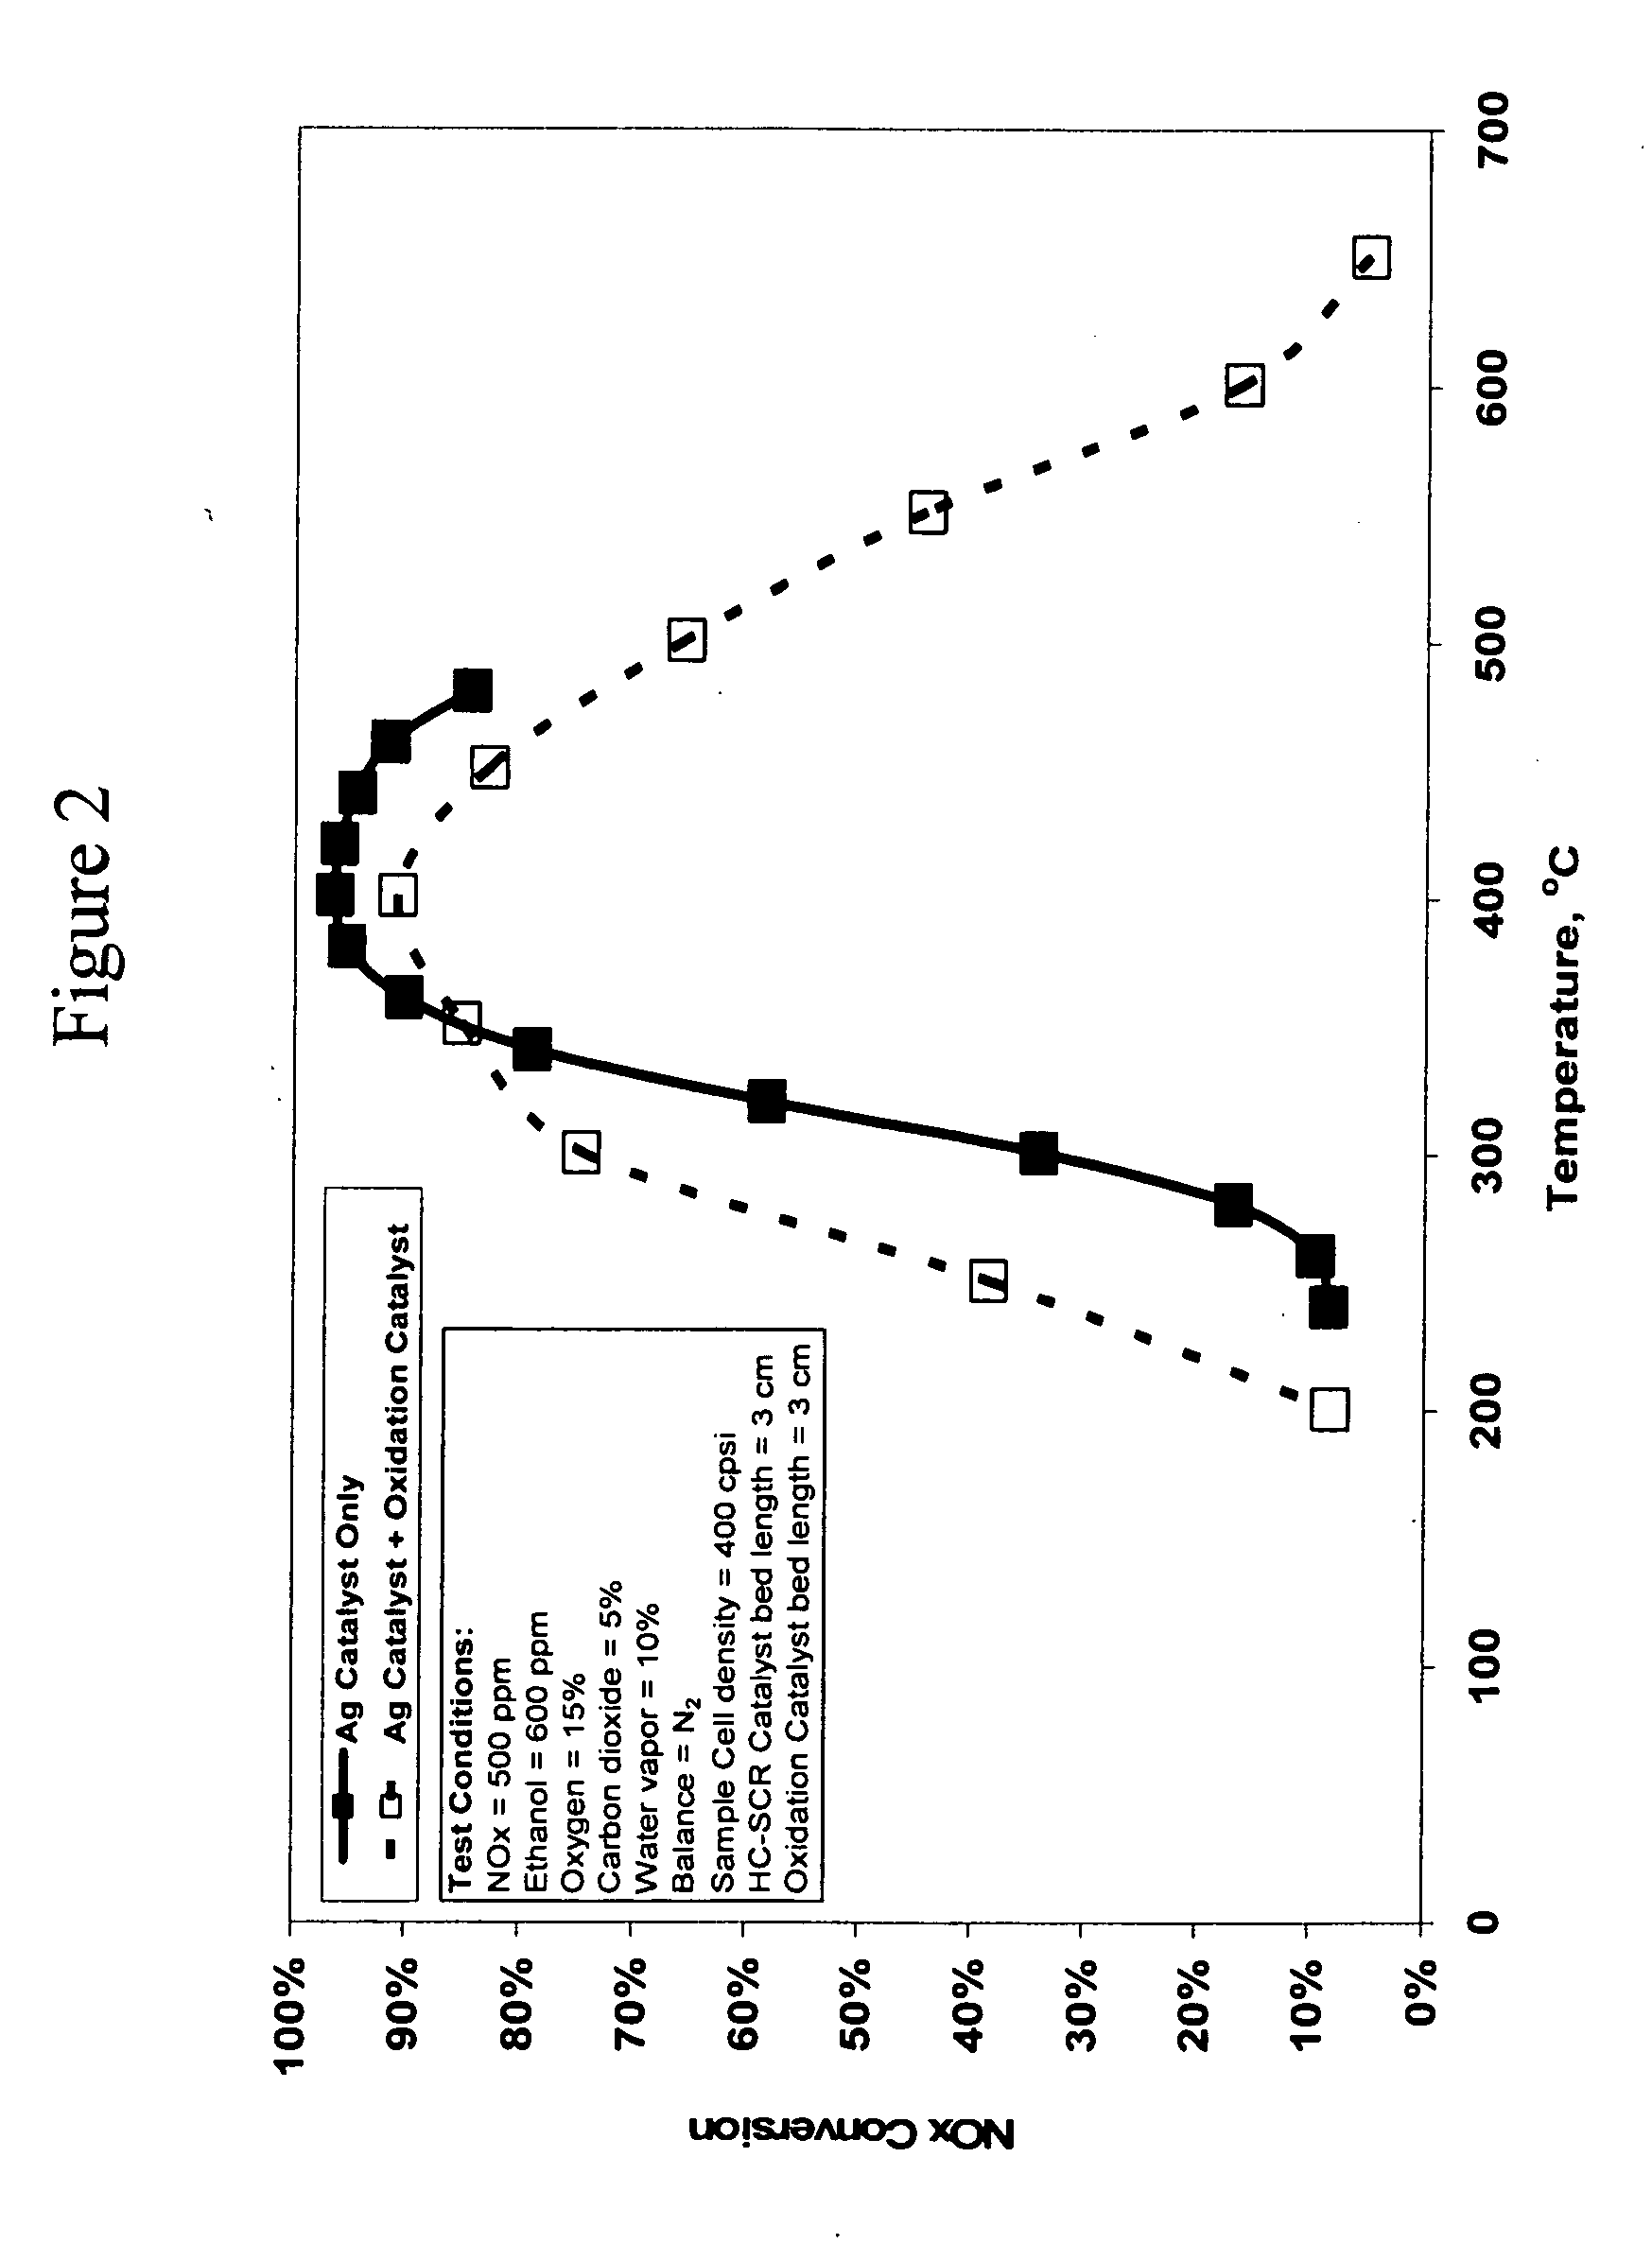 Catalyst and method for reducing nitrogen oxides in exhaust streams with hydrocarbons or alcohols